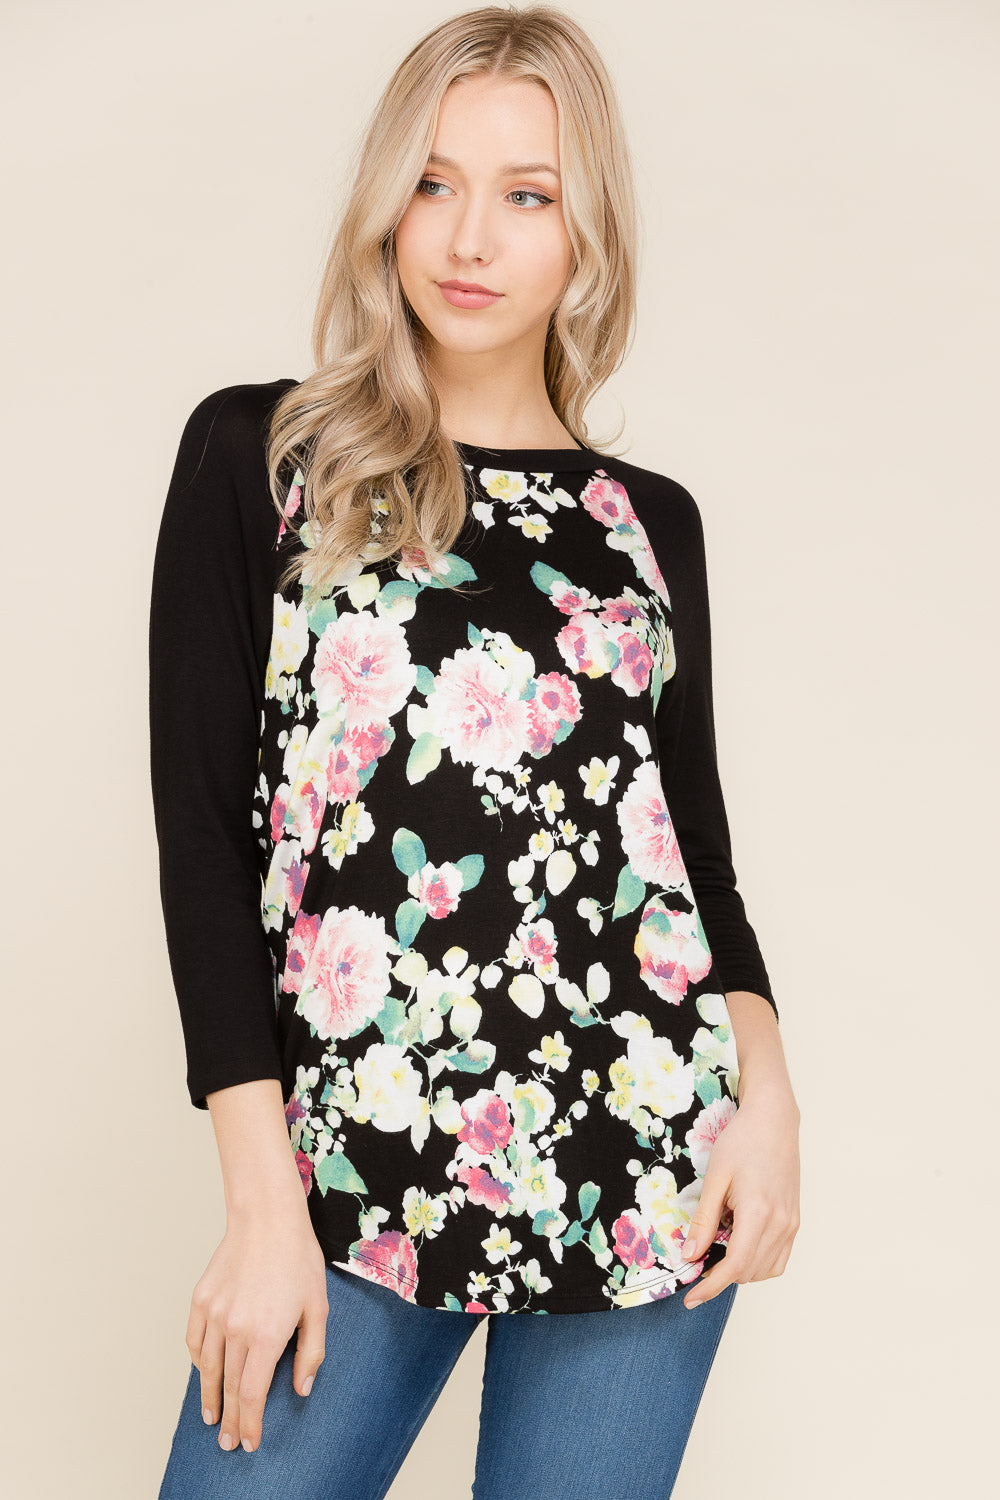 FIRST LOVE PLUS SIZE - JULIET FLORAL BASEBALL TEE – Johnnie Dove Boutique